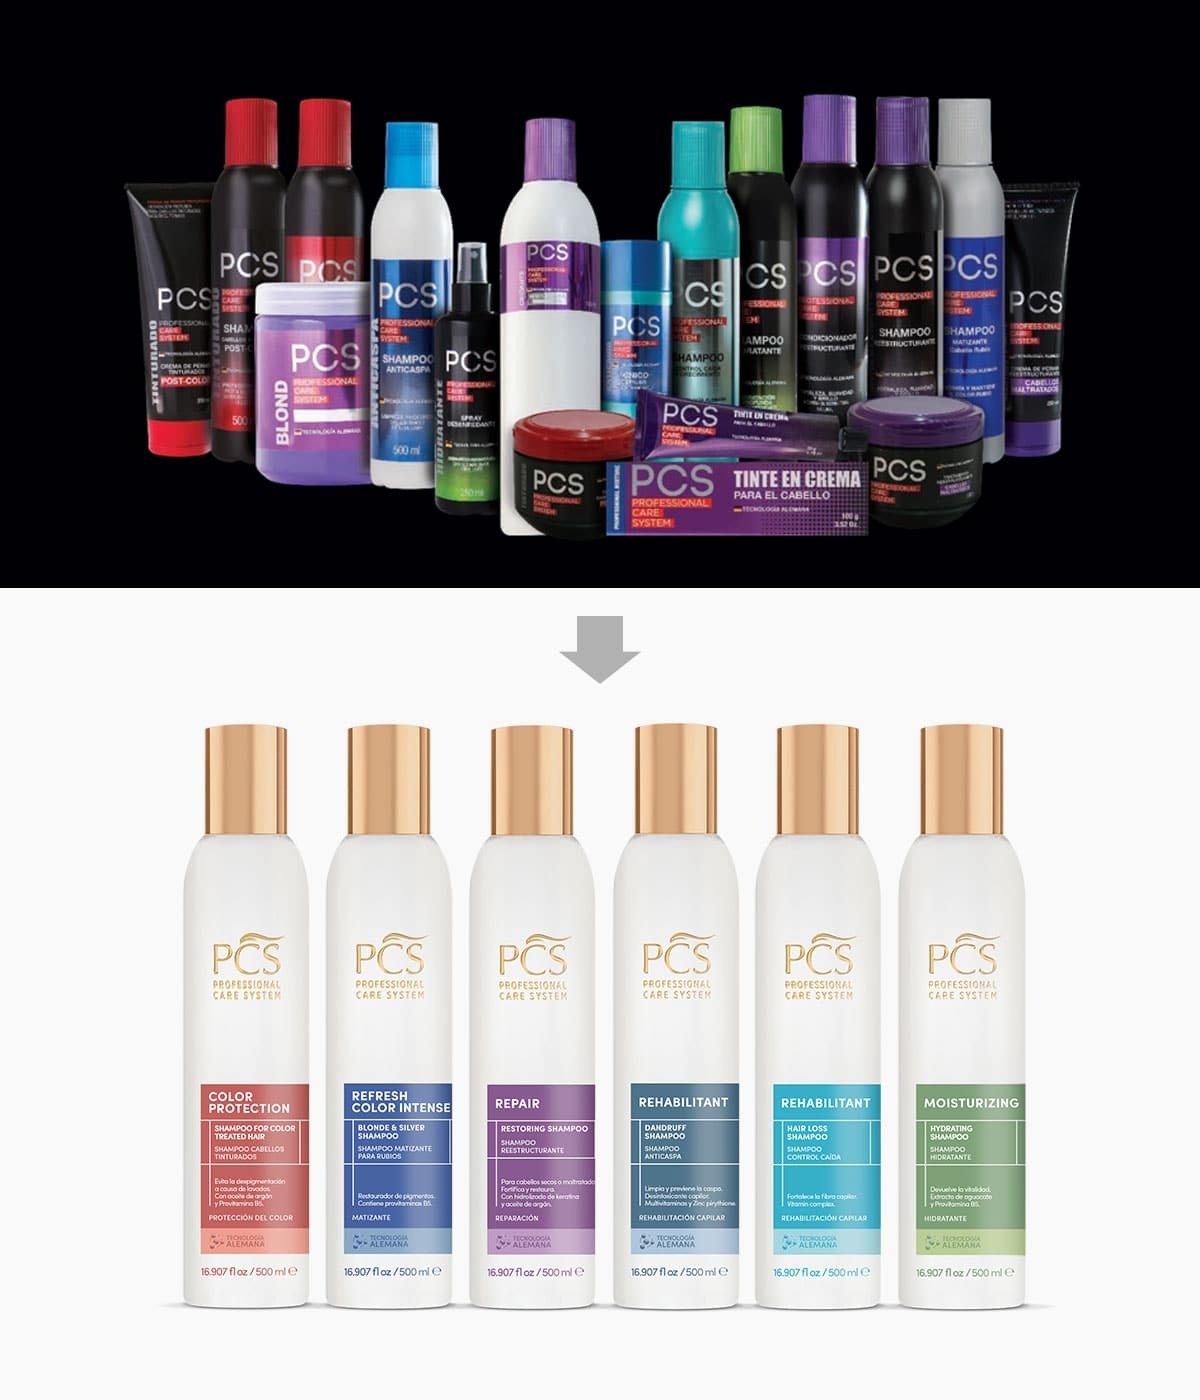 imaginity, pcs, professional care system, hair treatment, packaging design, product line, before and after